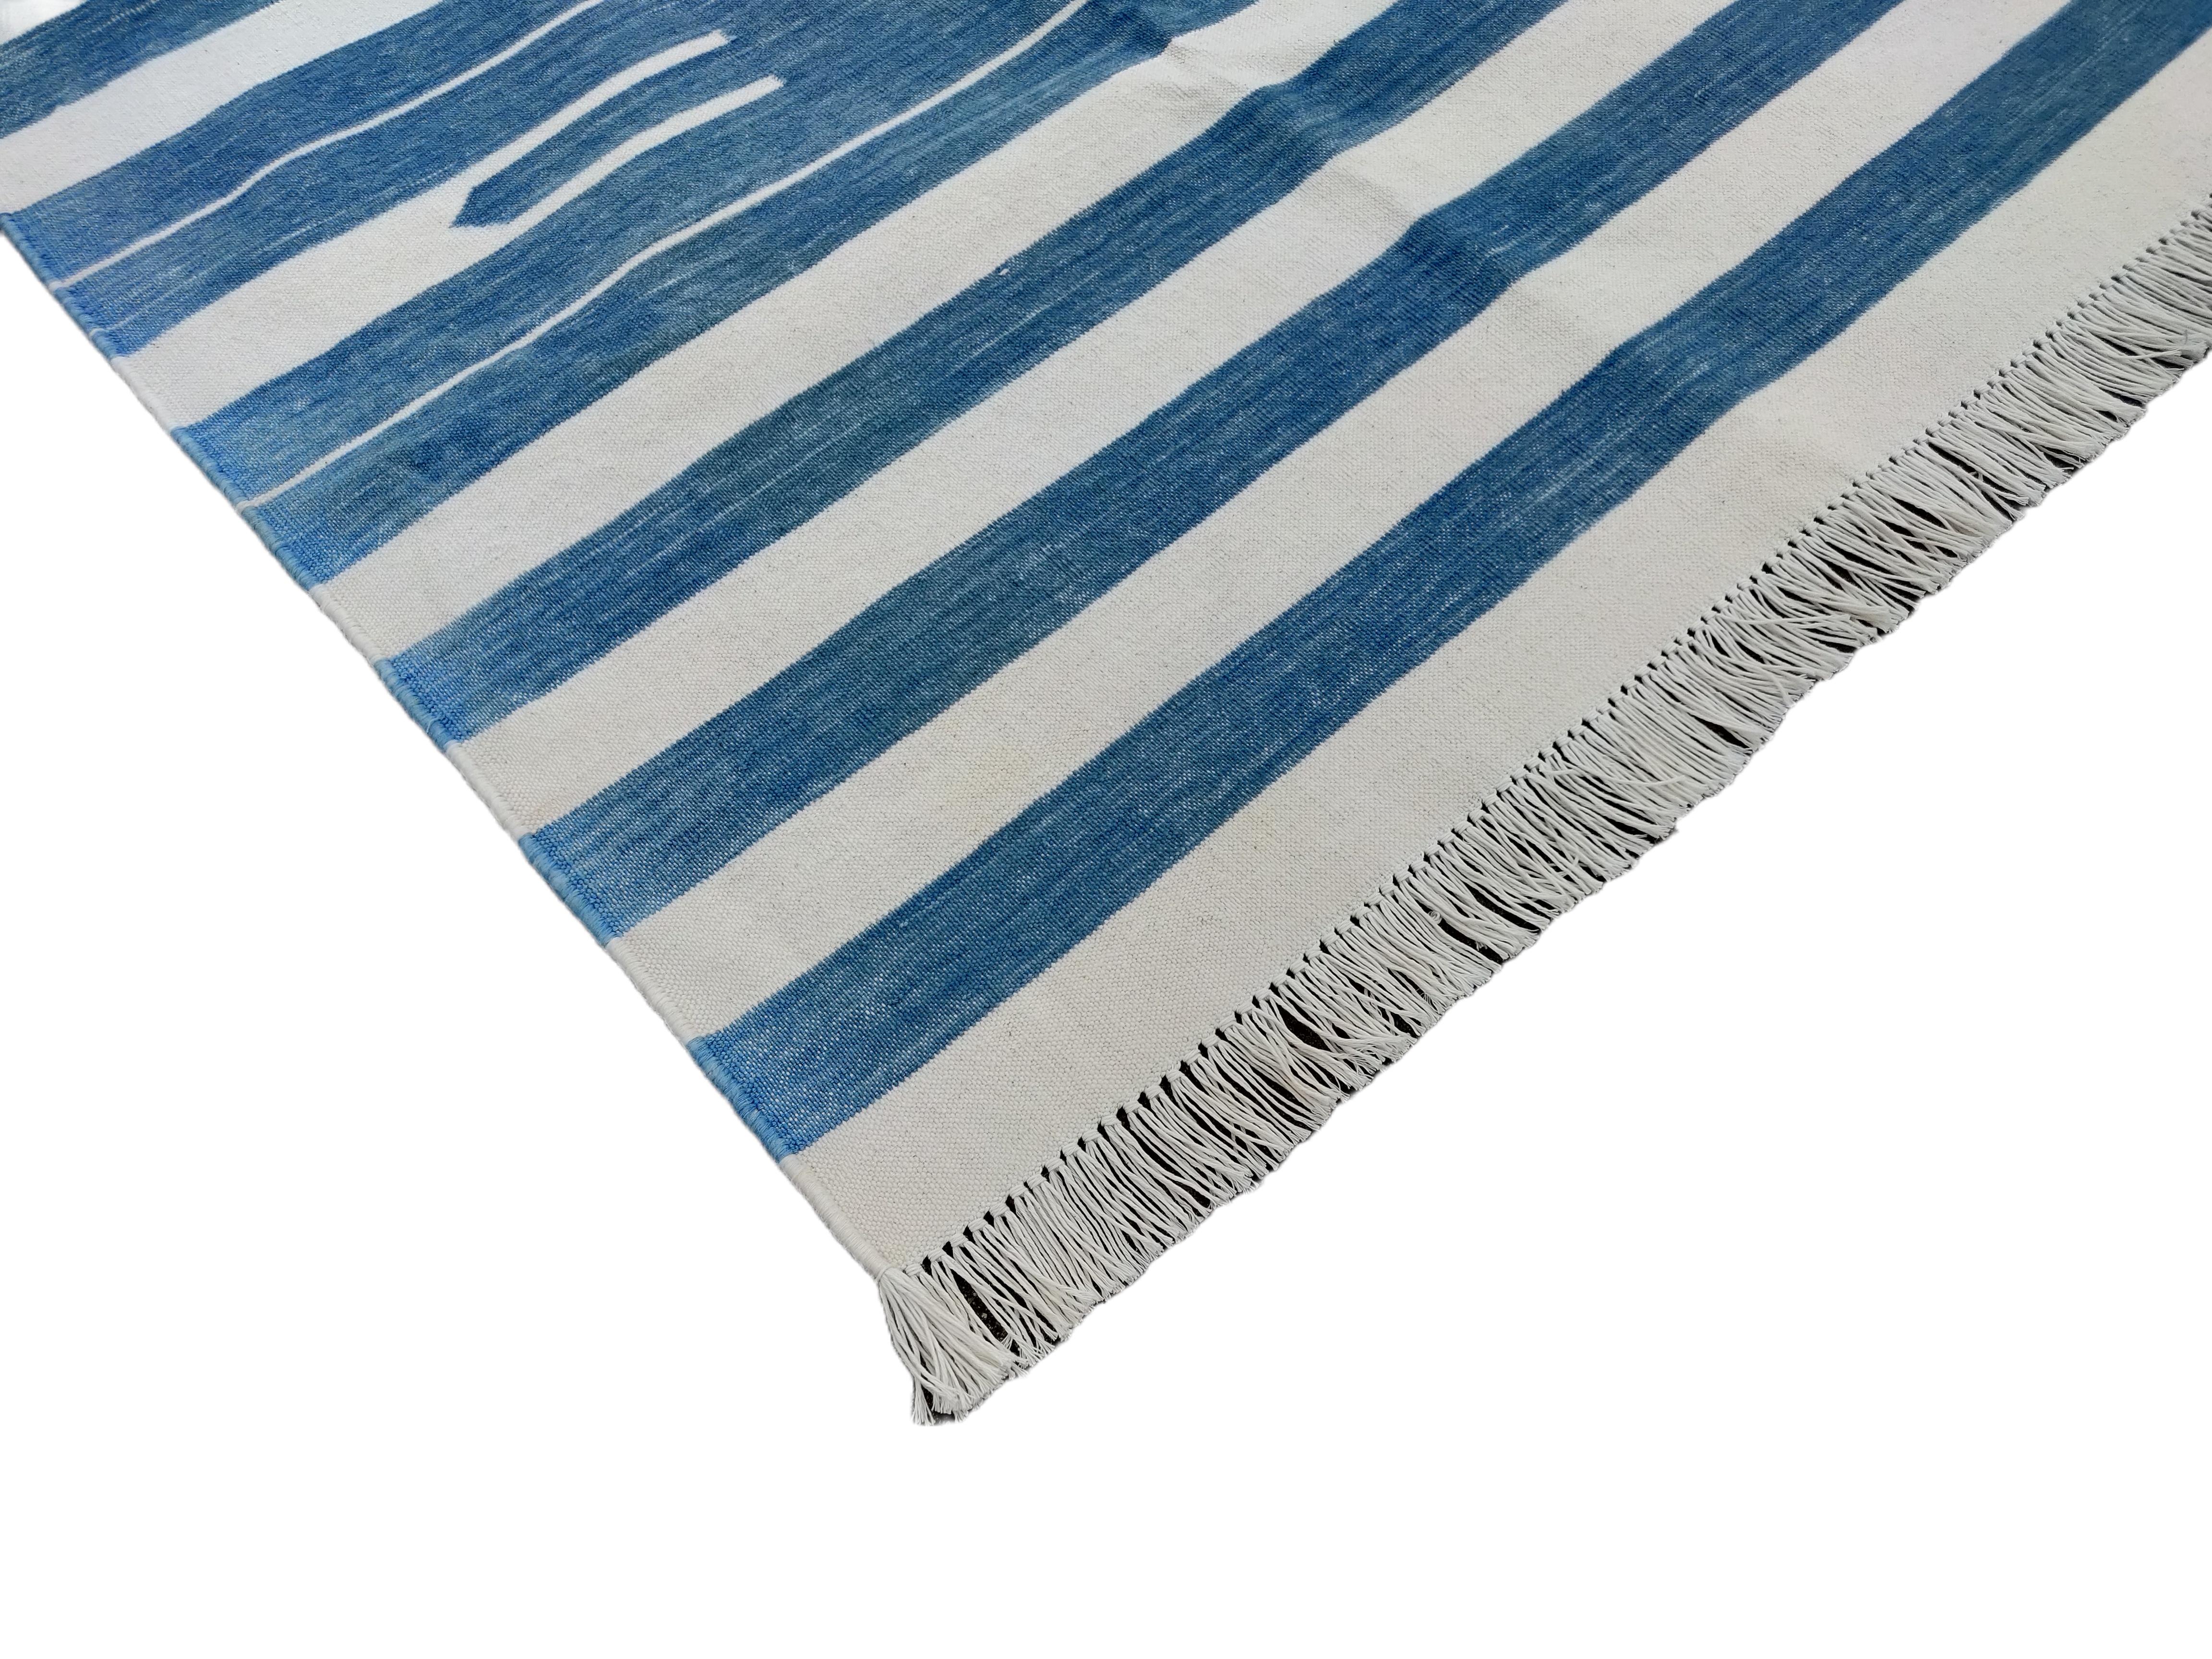 Contemporary Handmade Cotton Area Flat Weave Runner, 3x10 Blue And White Striped Dhurrie Rug For Sale